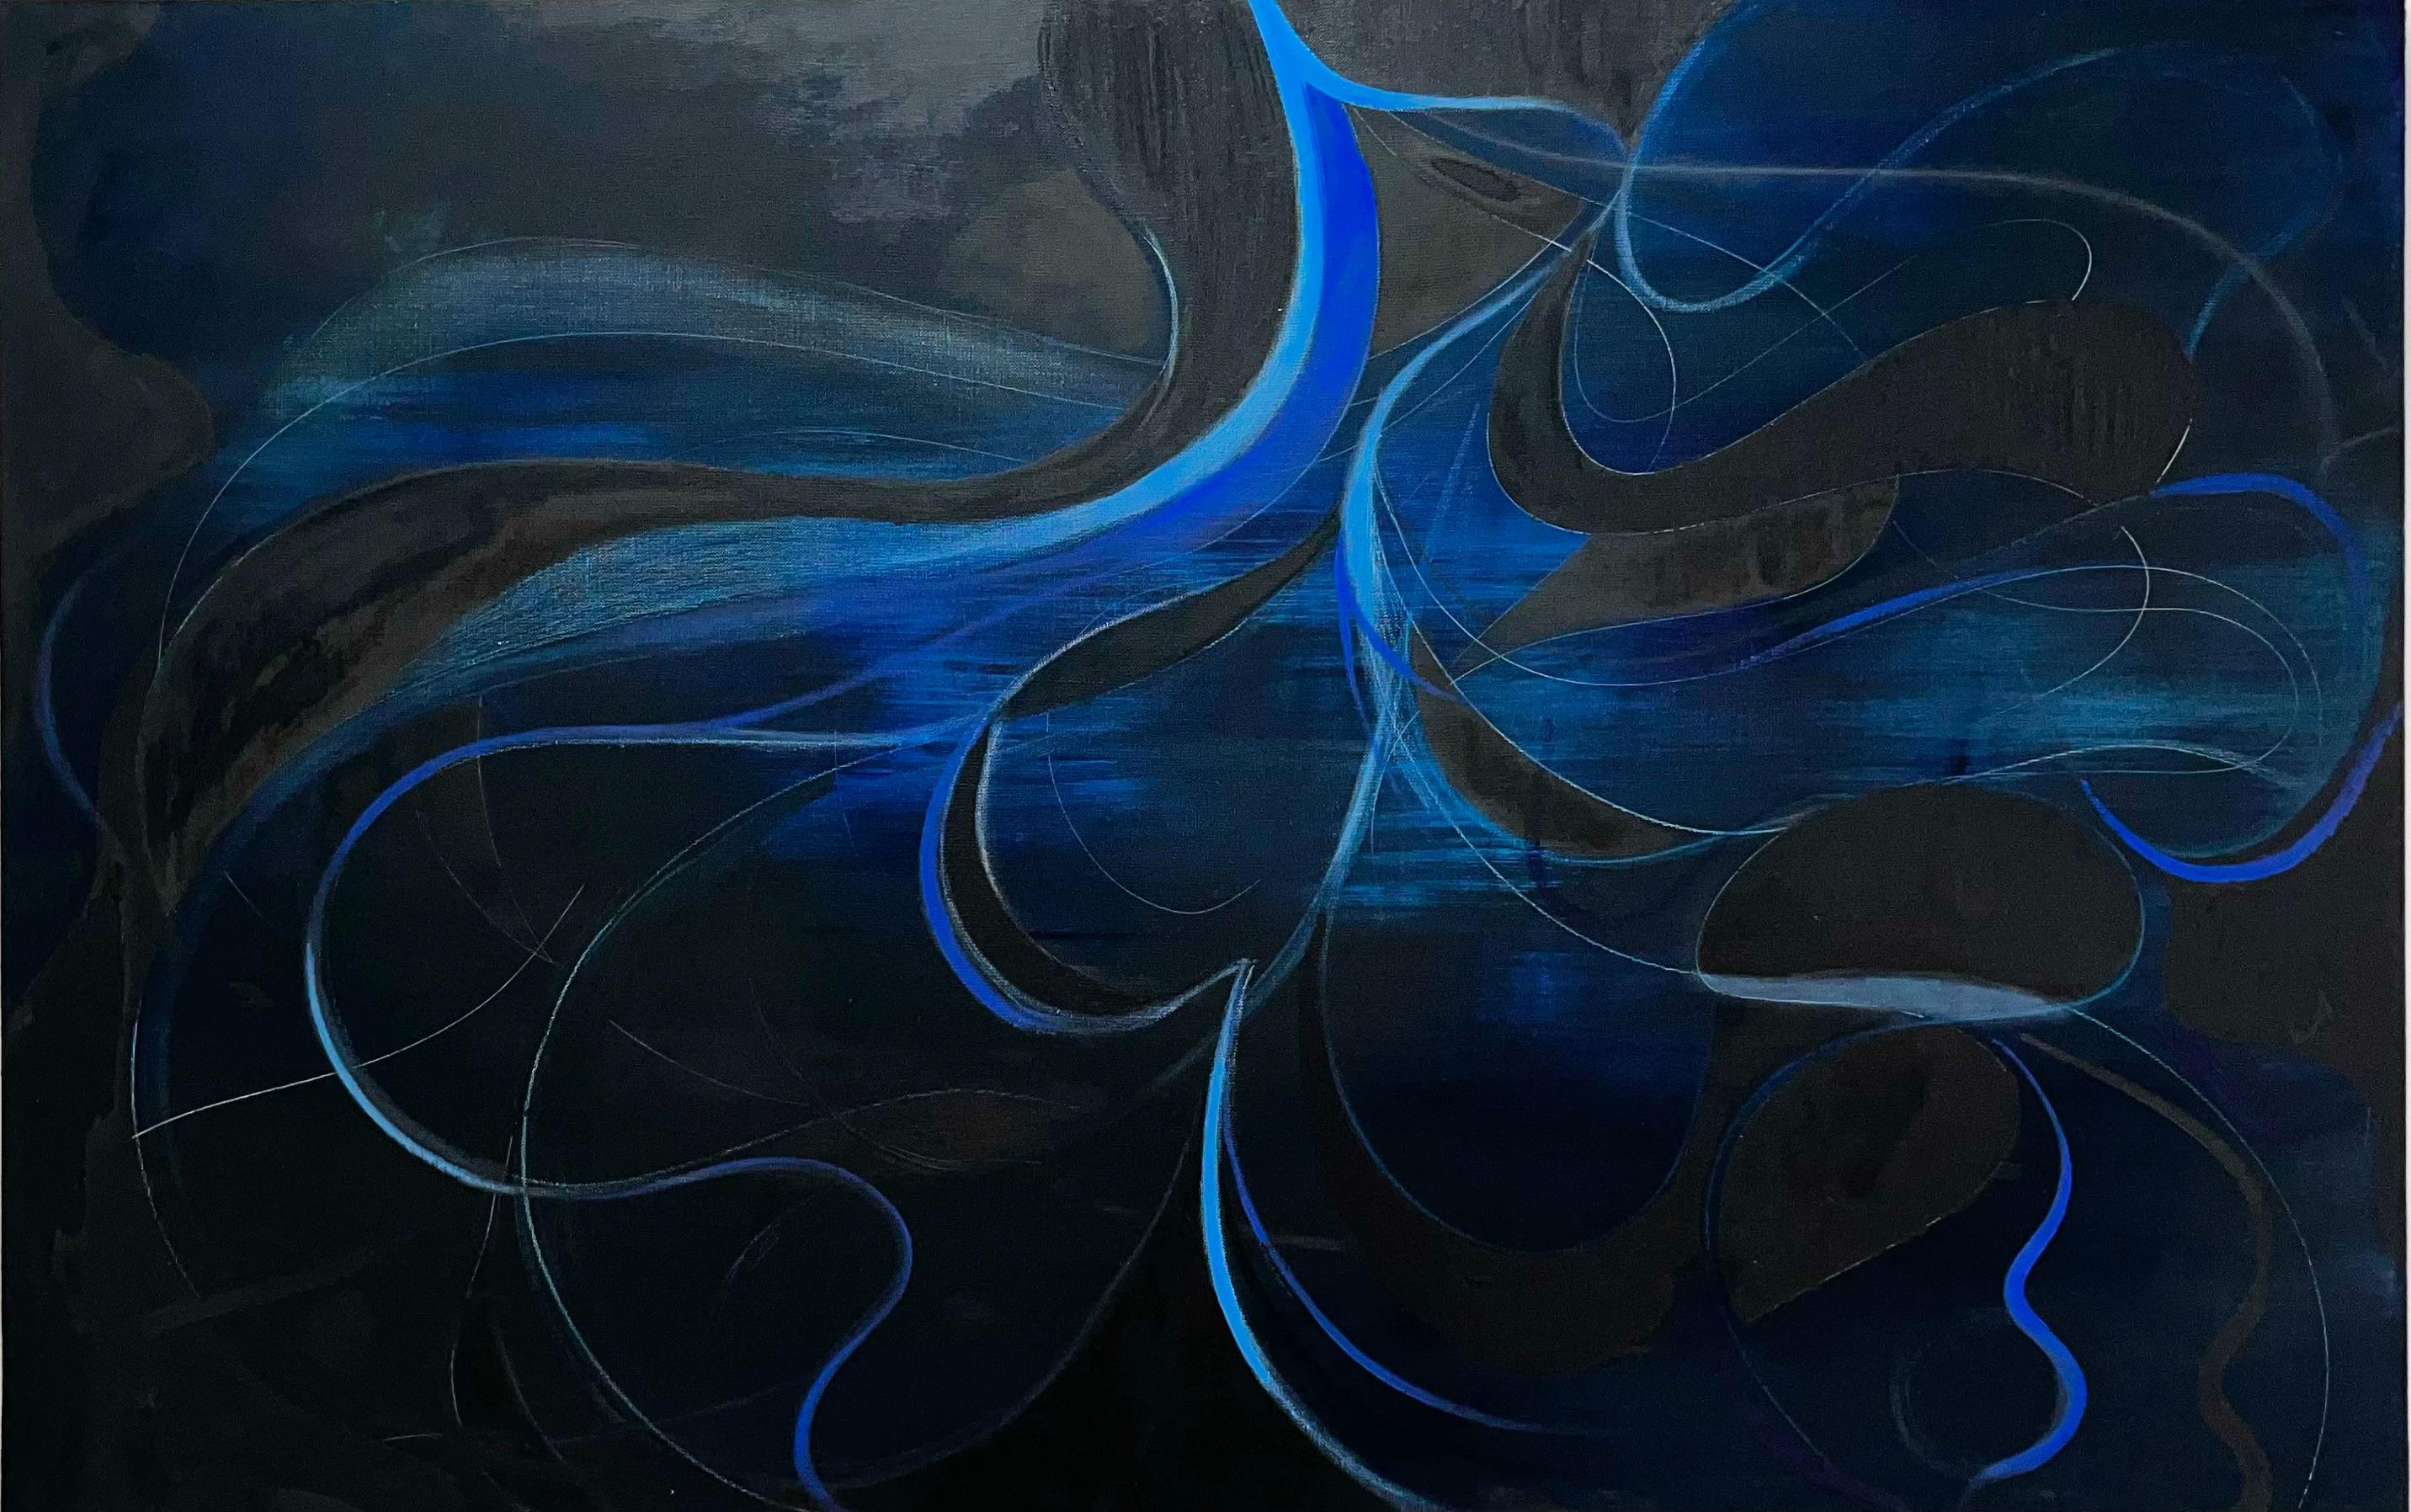 Nicolás Guzmán Abstract Painting - Untitled - organic, oil painting, blue and black, layered, took 1 year to dry